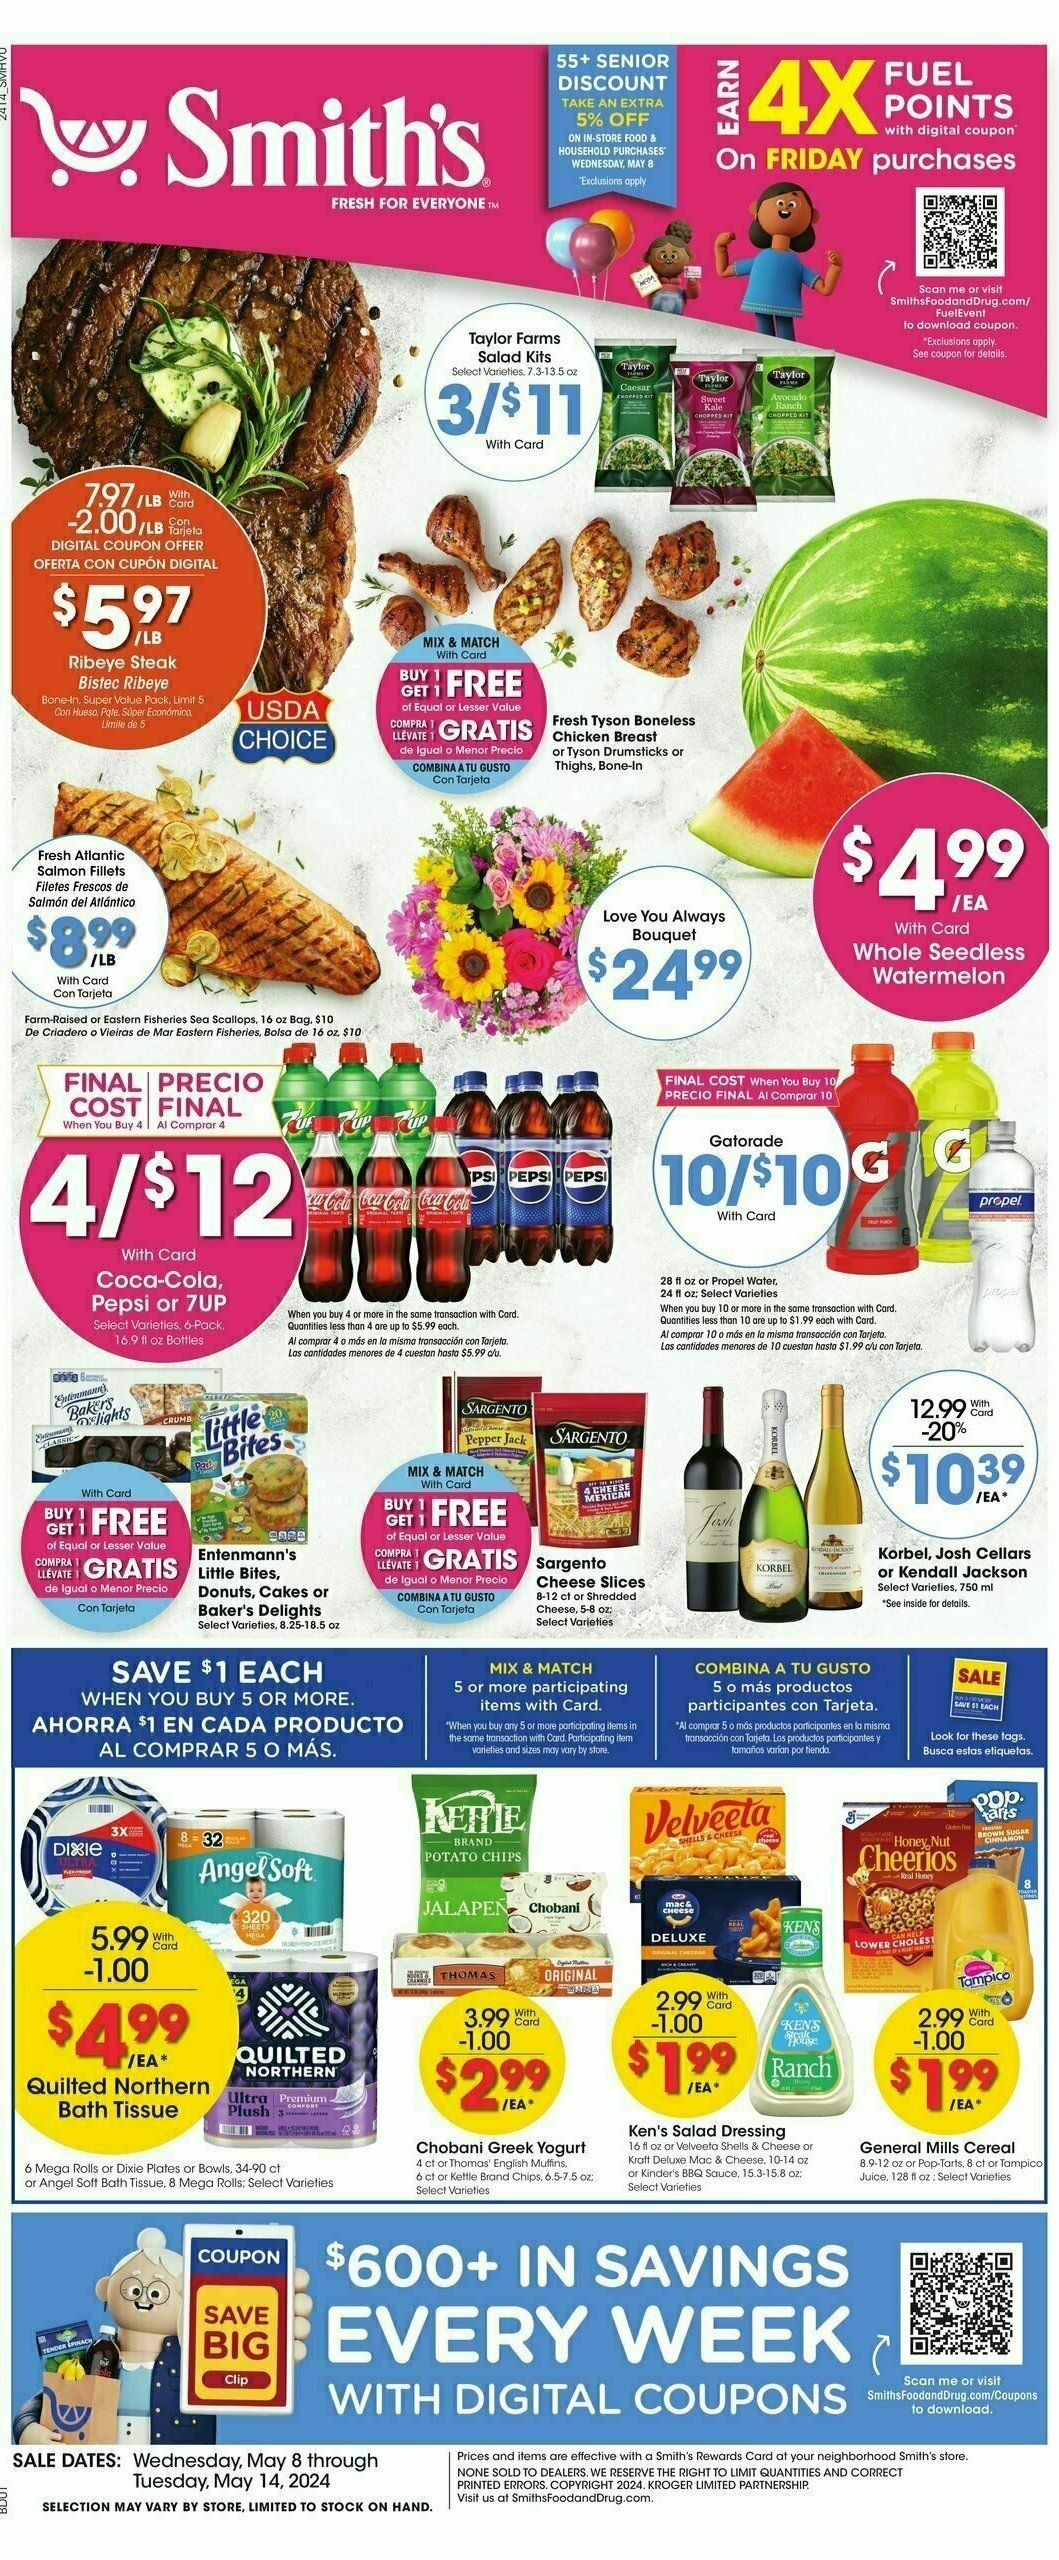 Smith's Weekly Ad from May 8